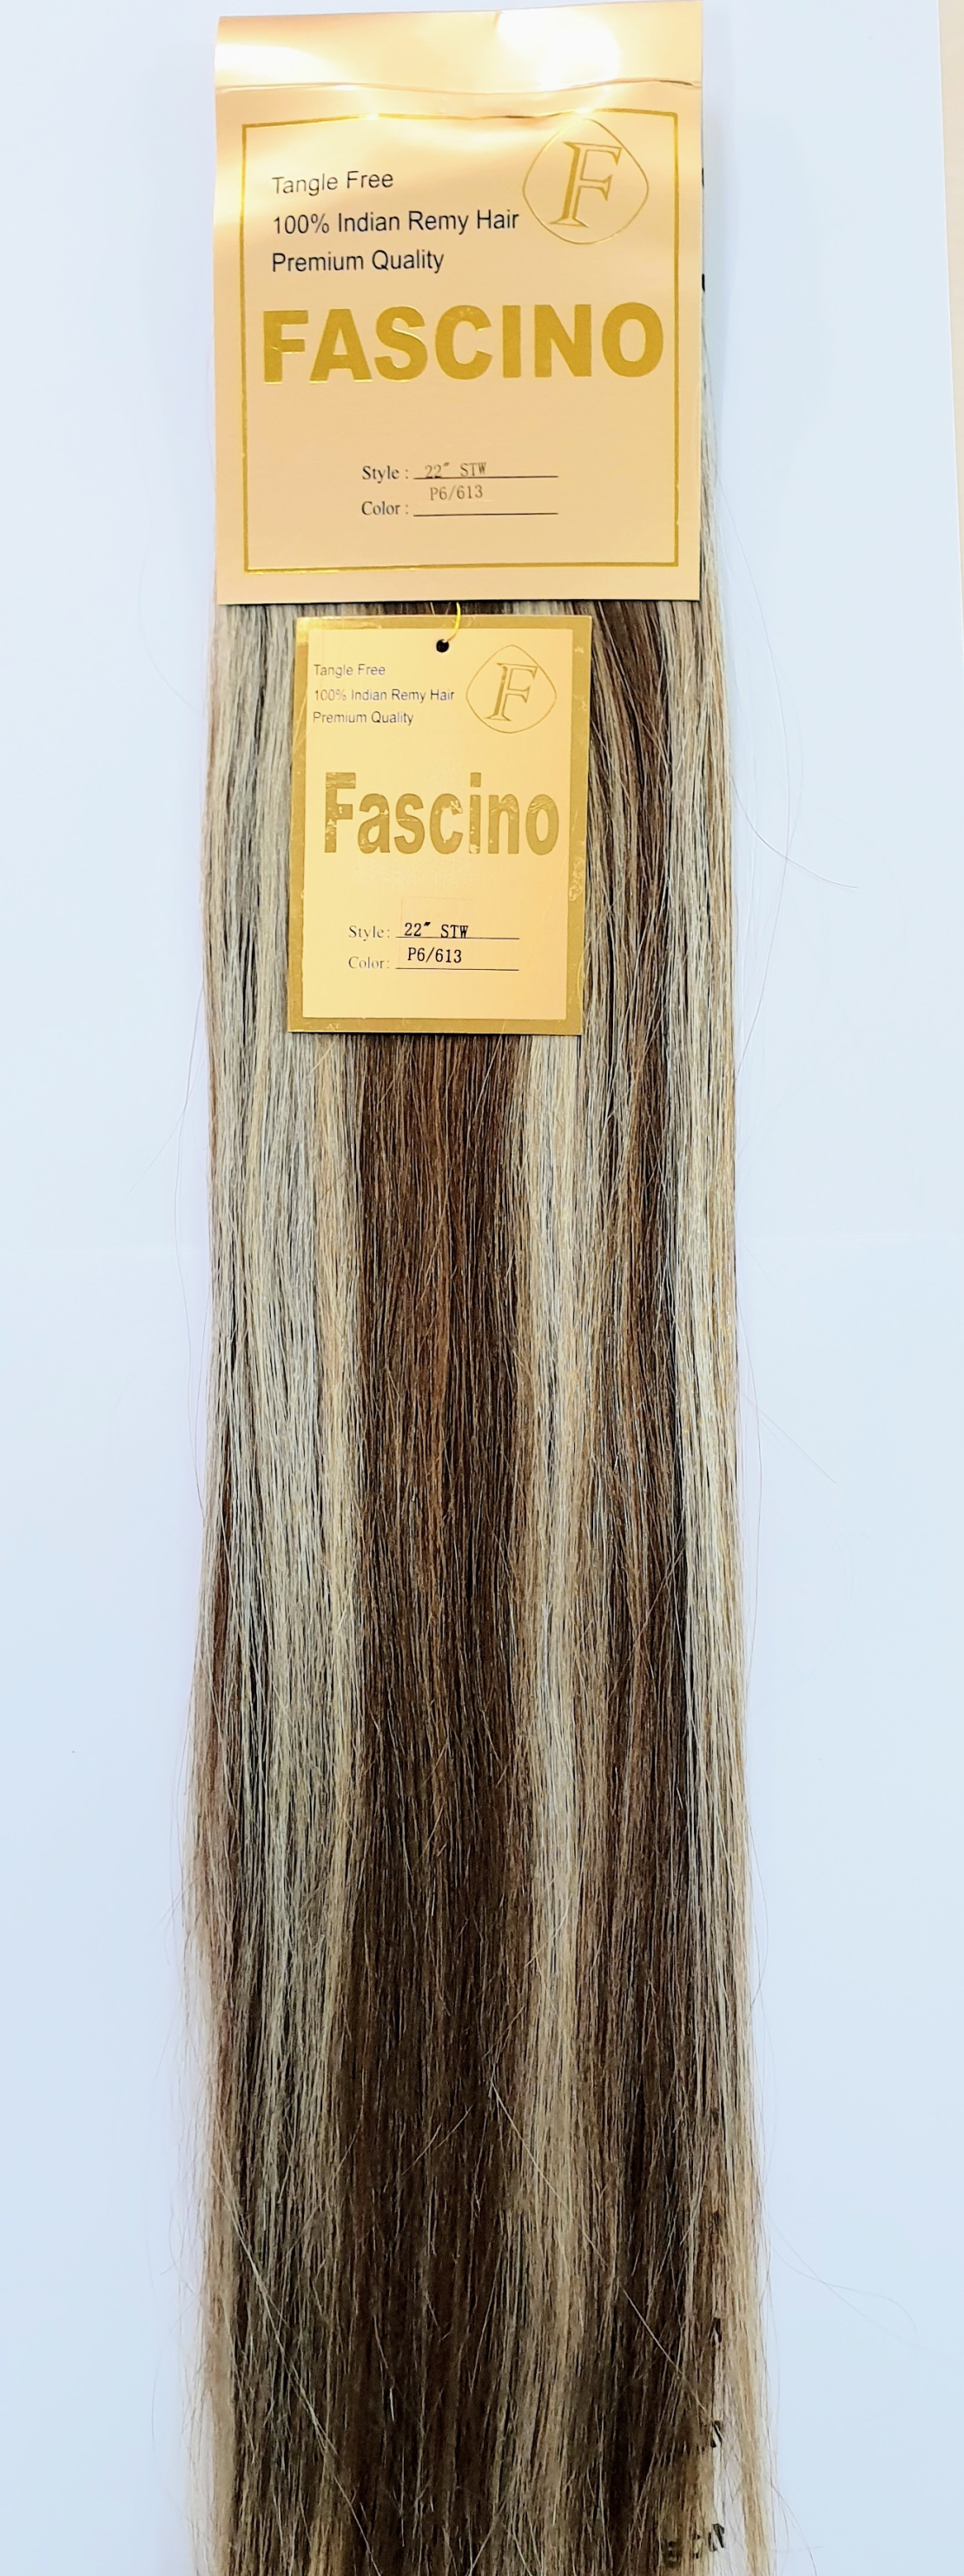 QUTICAL REMY Indian human hair weft